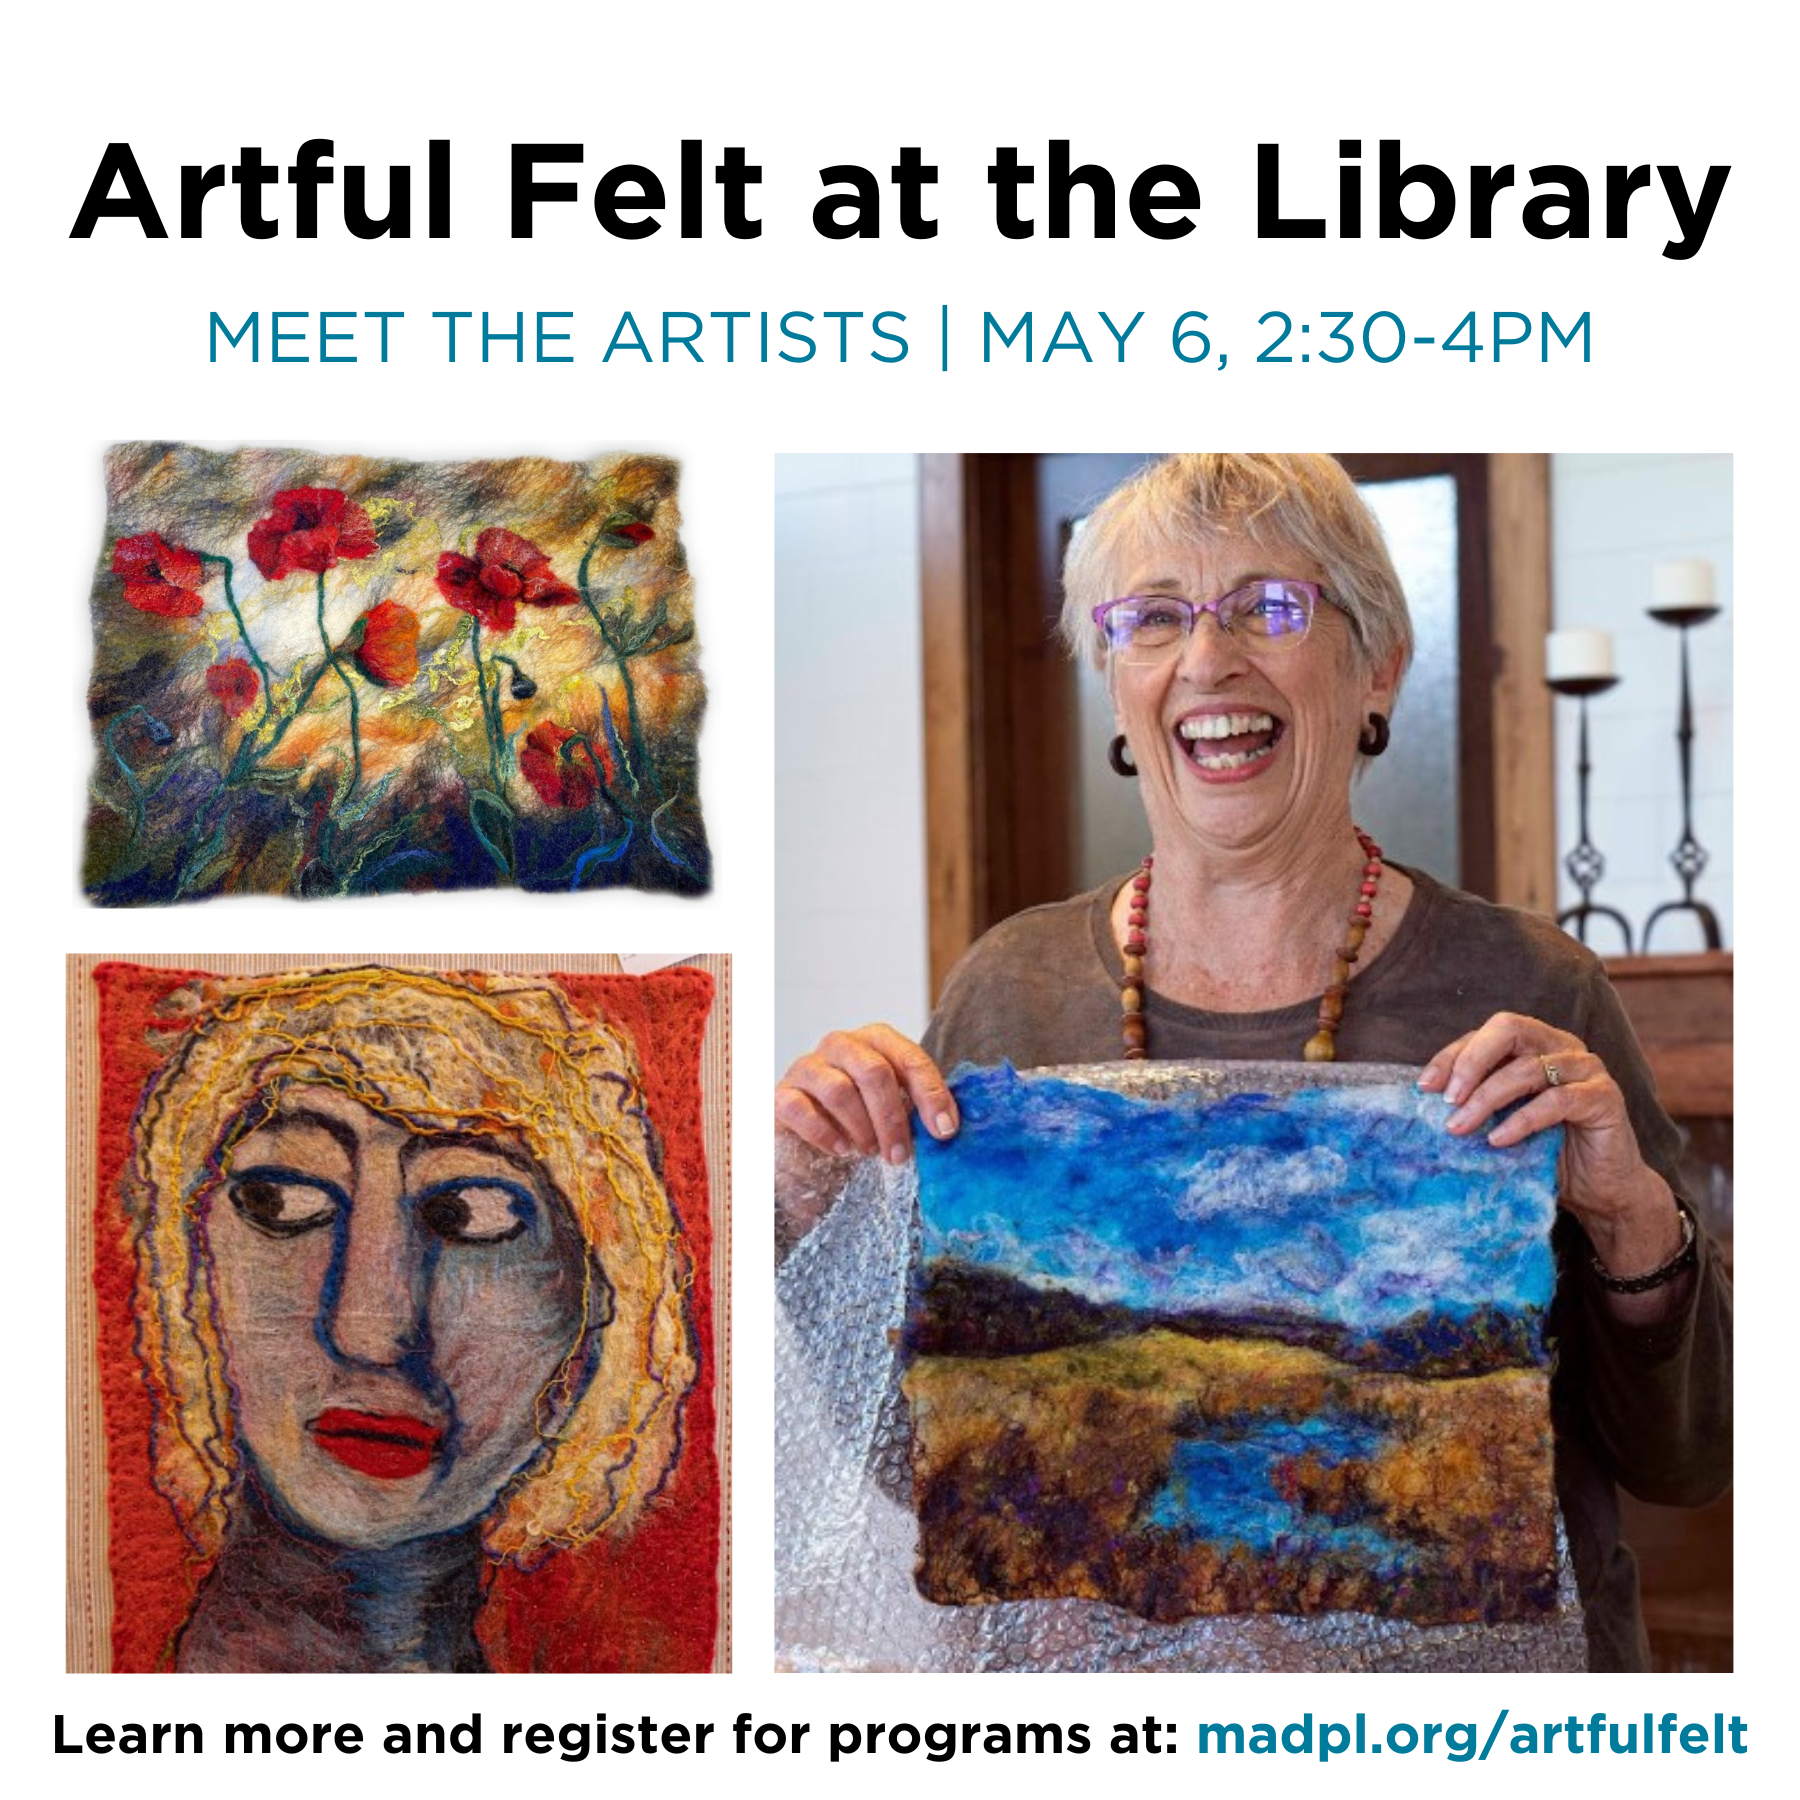 Artful Felt an exhibition by the Madison Area Felters' Guild